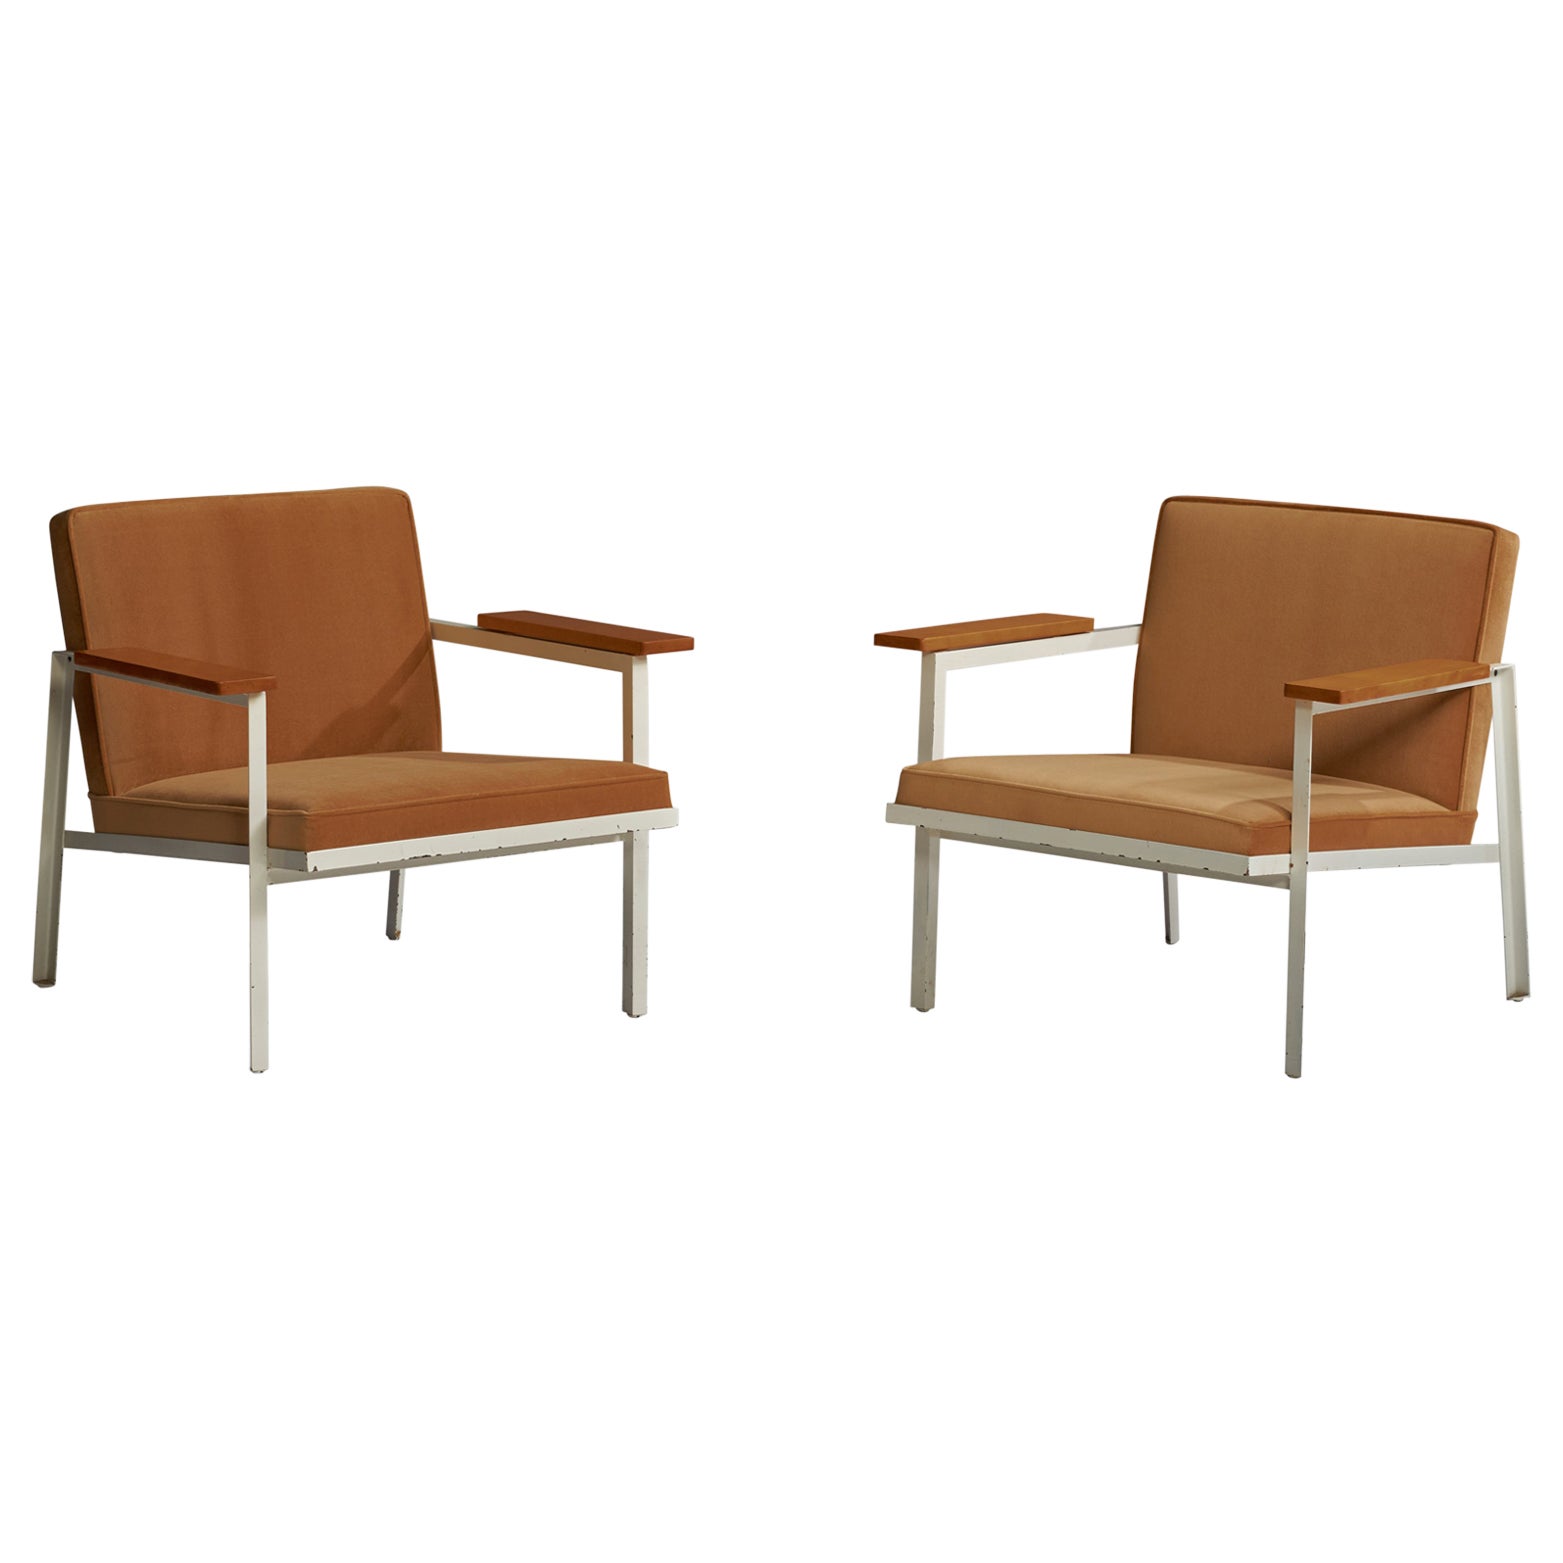 George Nelson, Lounge Chairs, Wood, Steel, Velvet, USA, 1950s For Sale